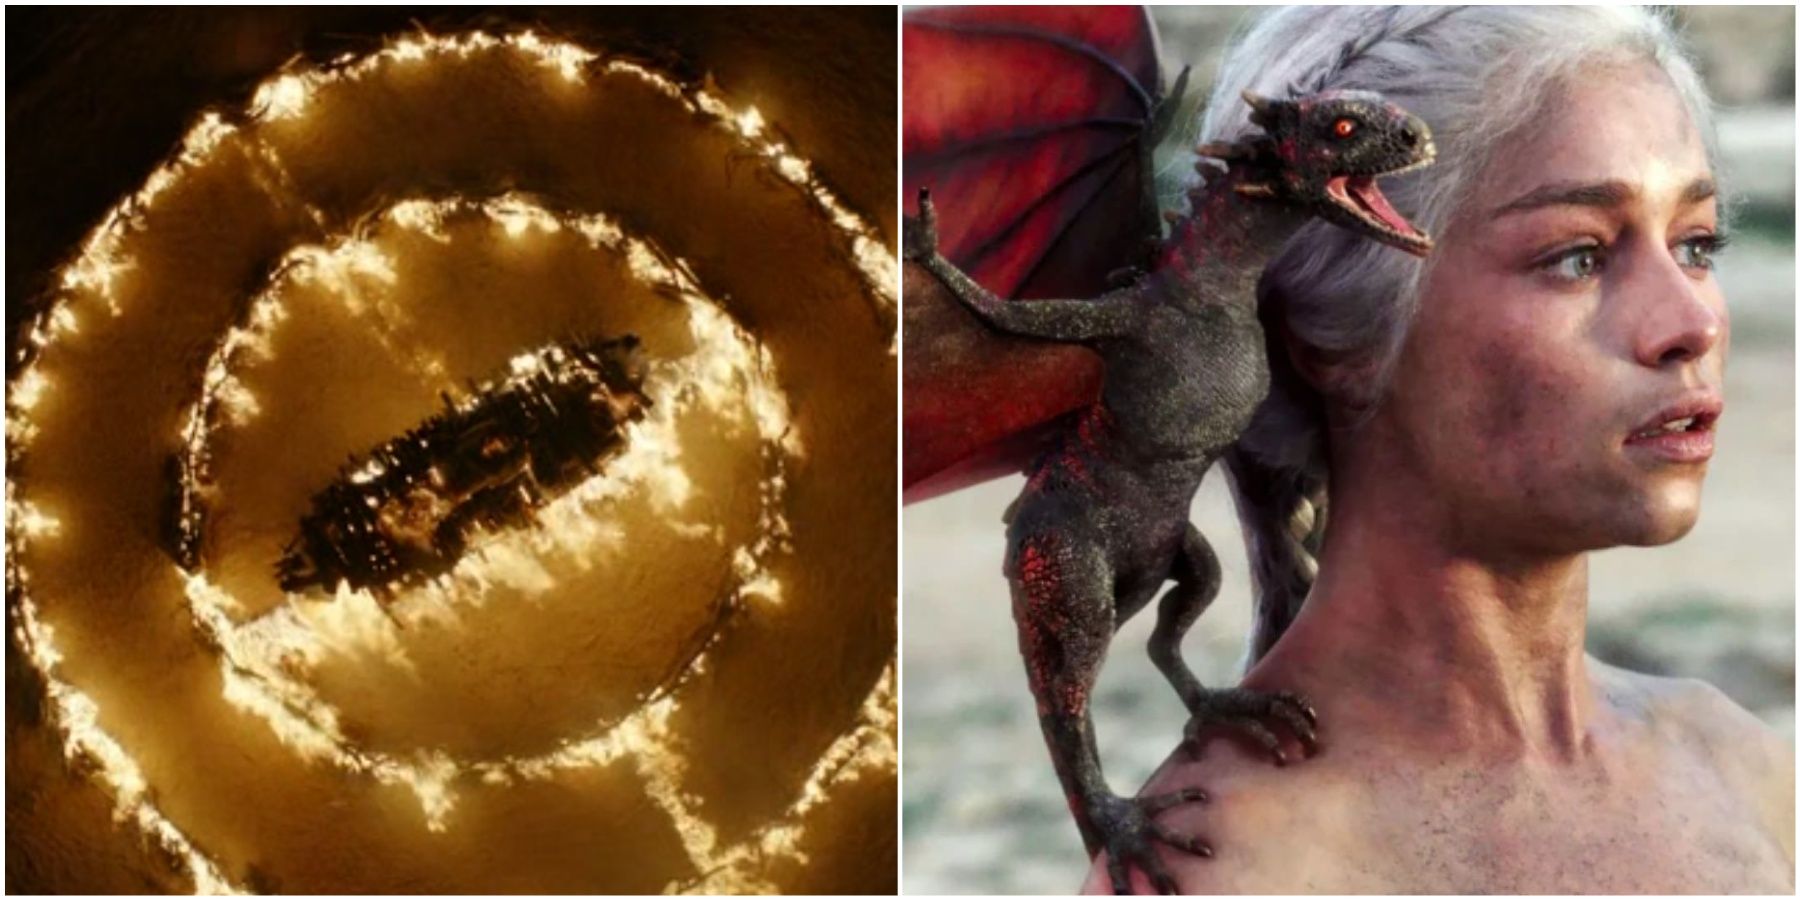 Shared image of Khal Drogo's burning pyre and Daenerys Targaryen and Baby Drogon in Game of Thrones.